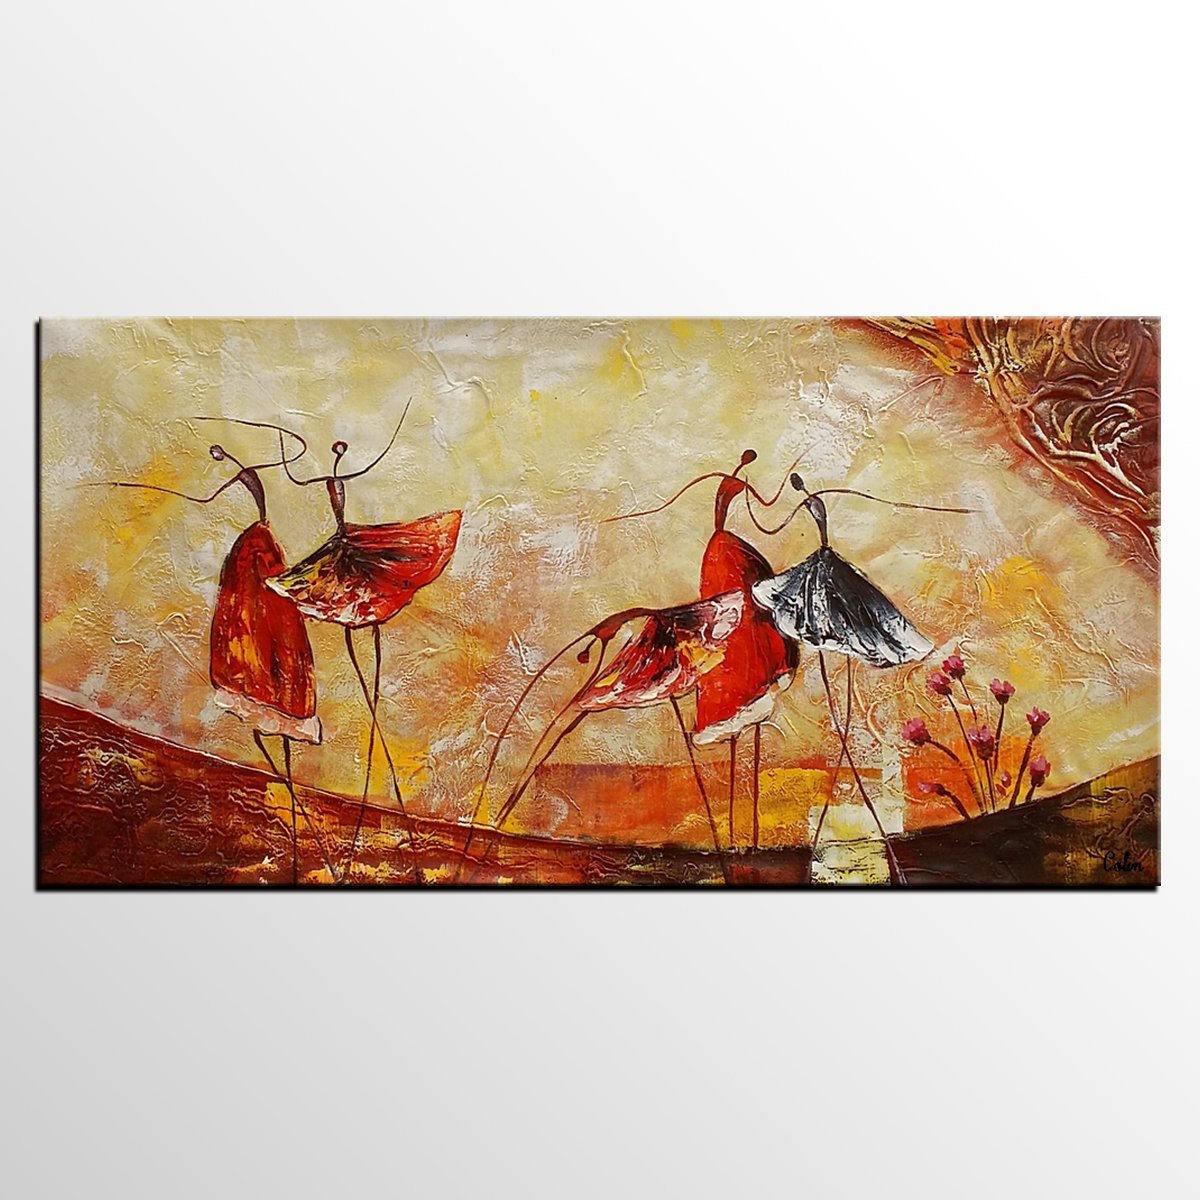 Simple Canvas Painting, Dining Room Wall Art Paintings, Buy Art Online, Abstract Acrylic Painting, Ballet Dancer Painting-Art Painting Canvas